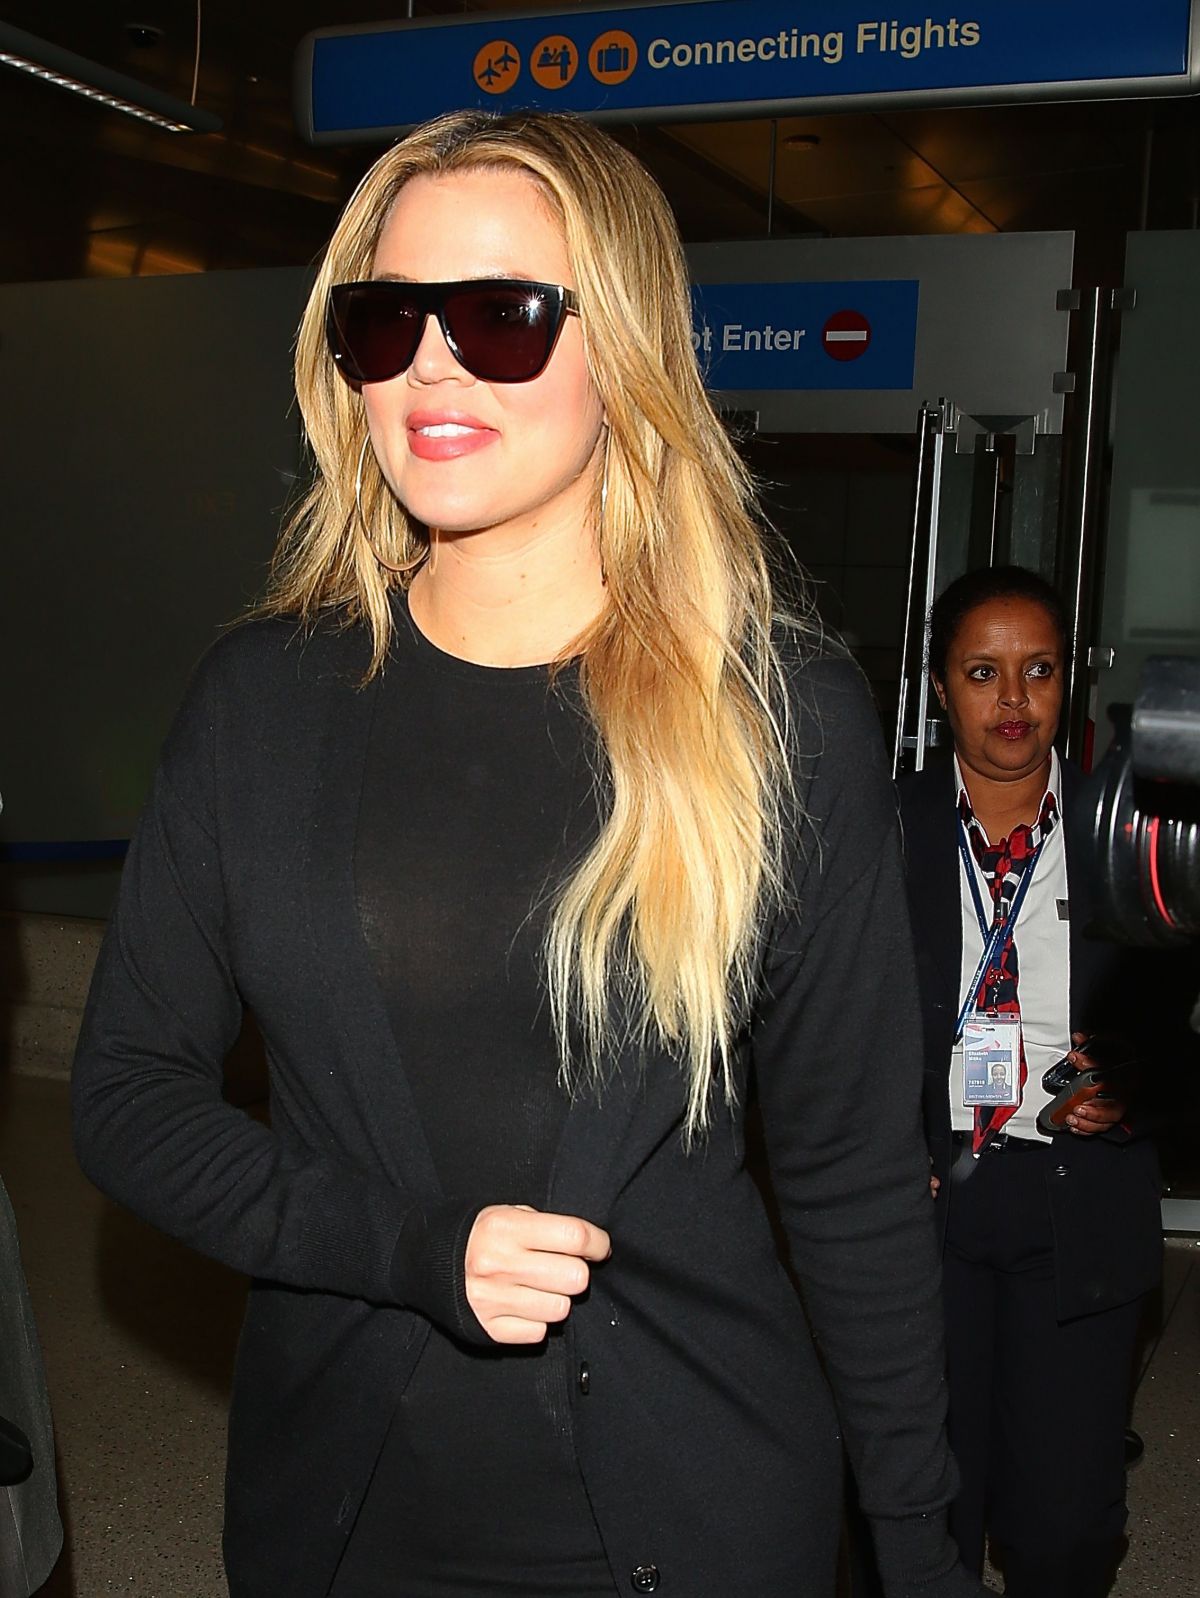 KHLOE KARDASHIAN in Jeans at LAX Airport in Los Angeles – HawtCelebs